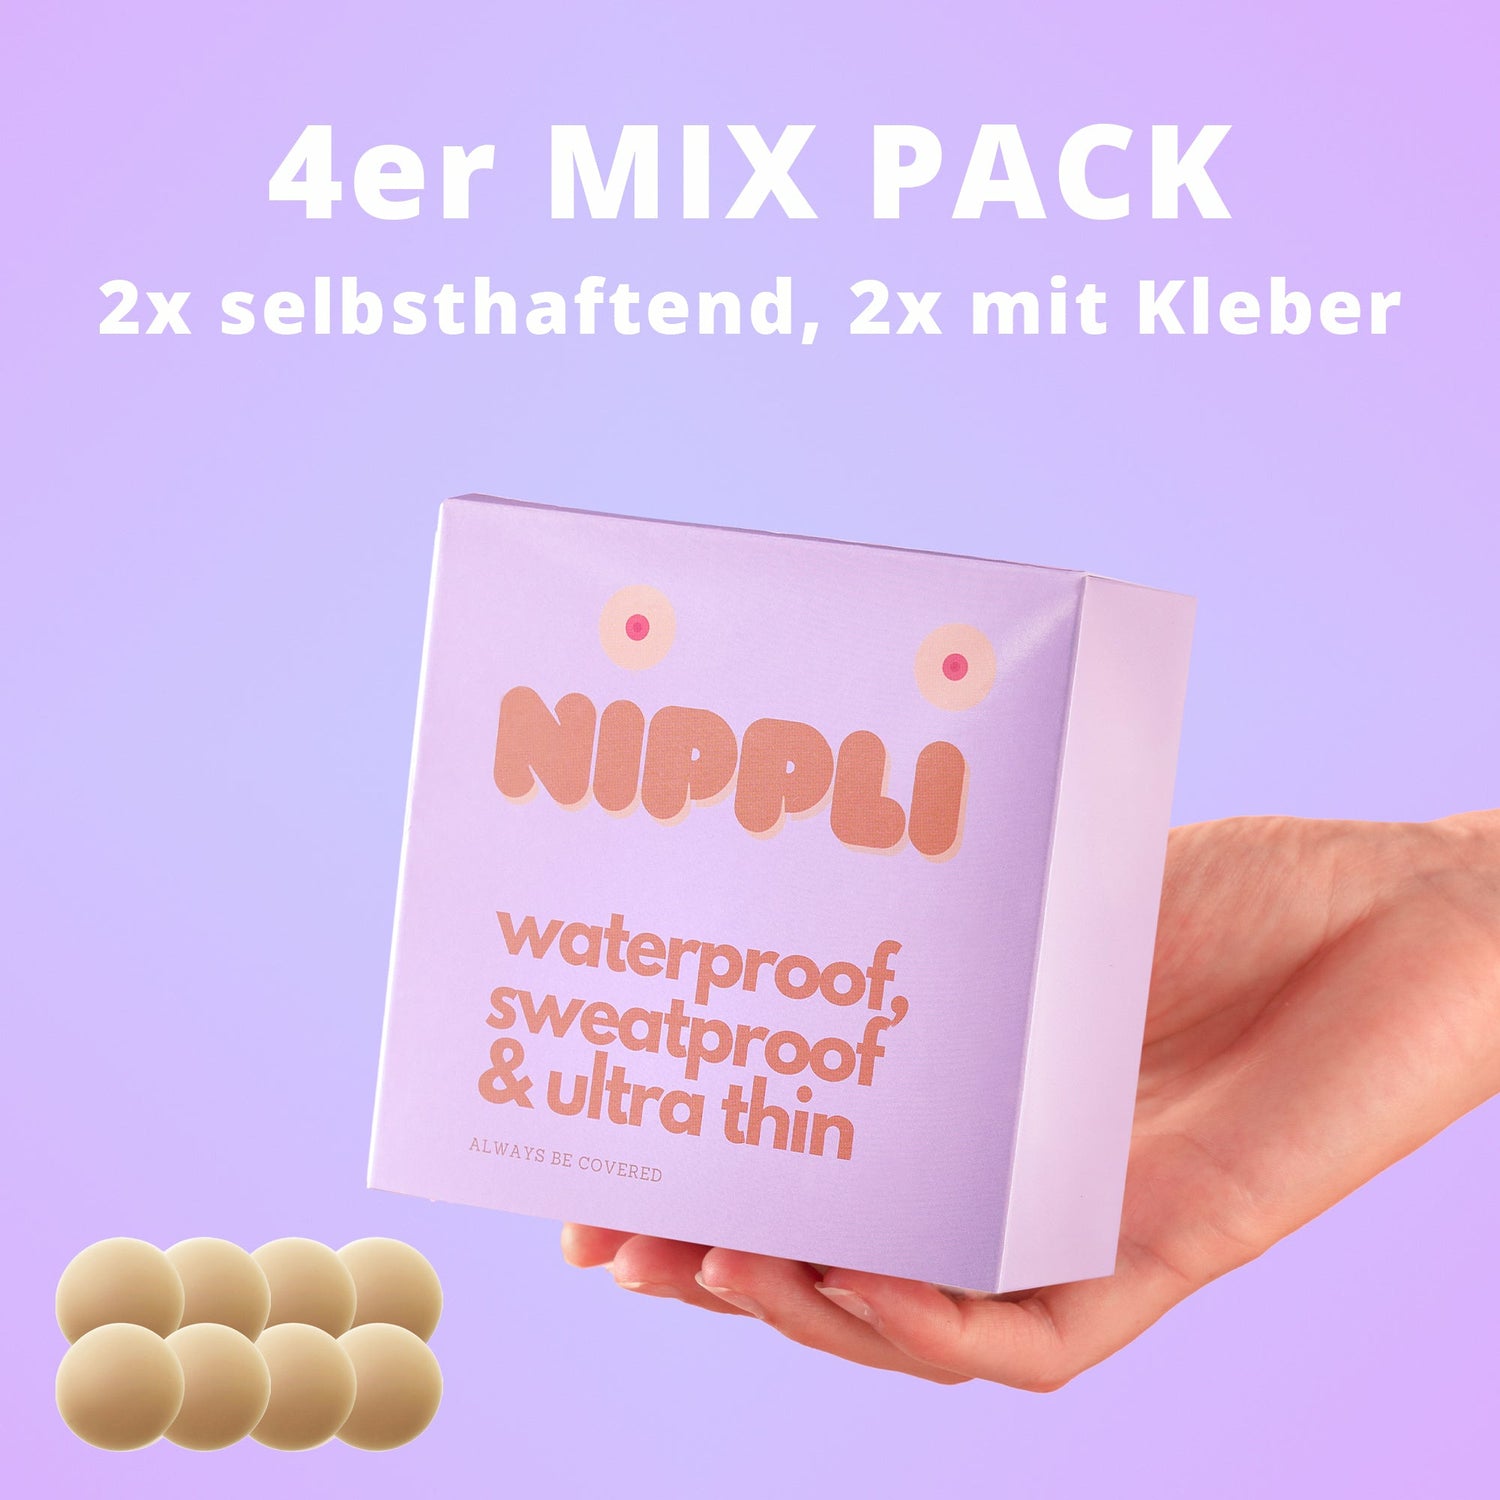 Nippel Pads selbstklebend im 4er Pack in der Farbe Tanned